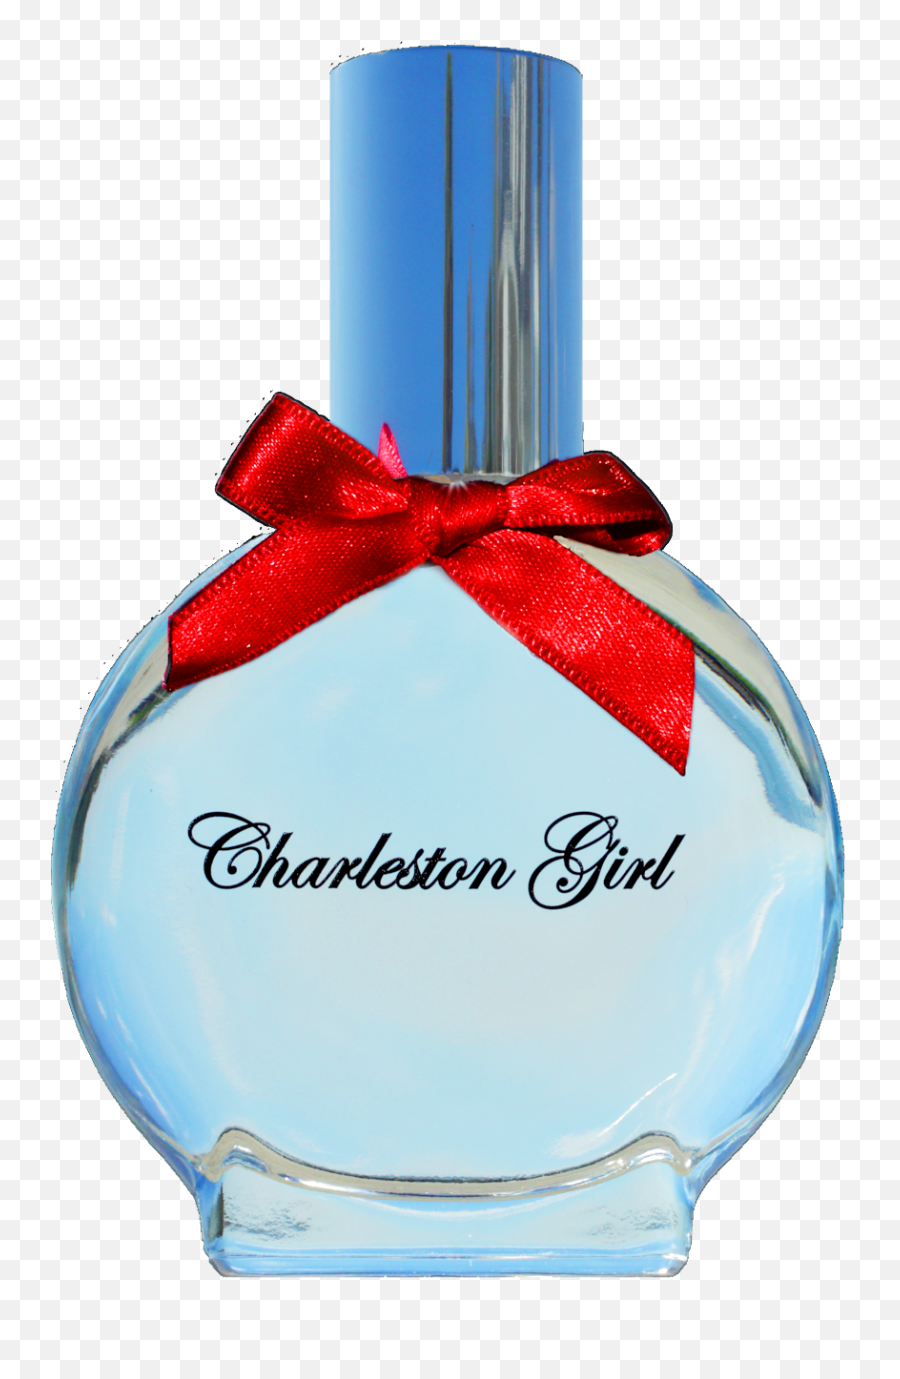 Perfume Png Image - Perfume Bottle Png Format,Perfume Bottle Png